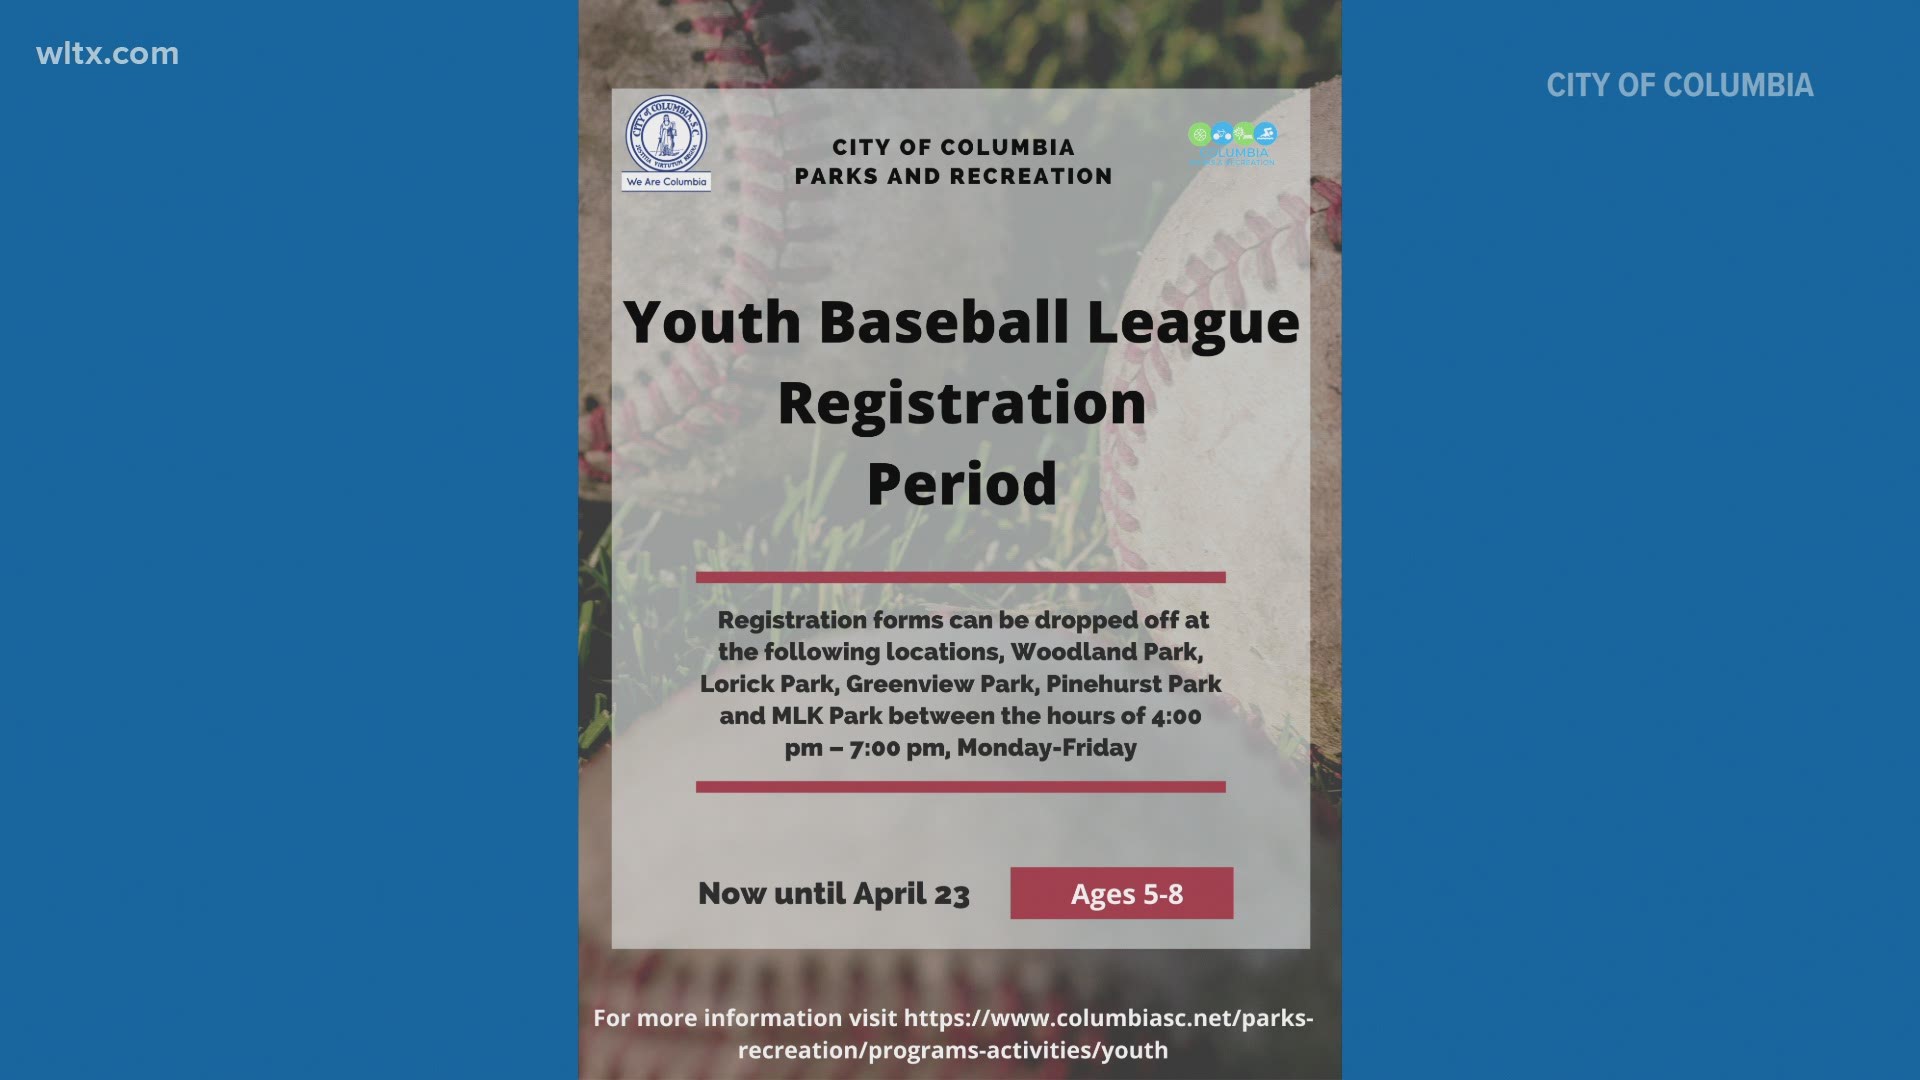 Children ages 5-8 years old can register at local City of Columbia Community Centers through April 23